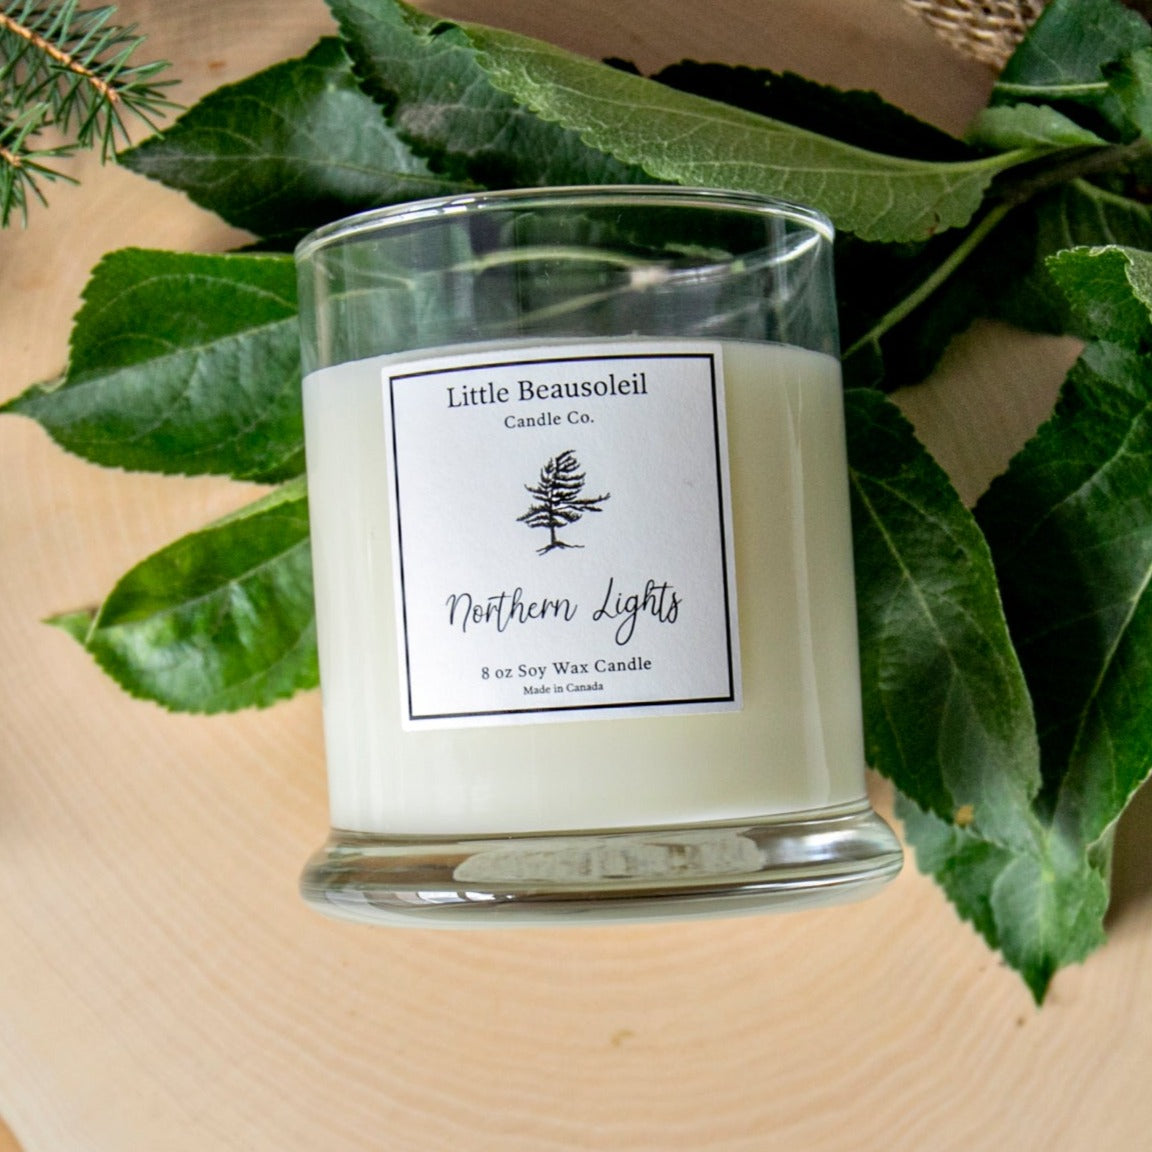 Soy Wax Candle by Little Beausoleil